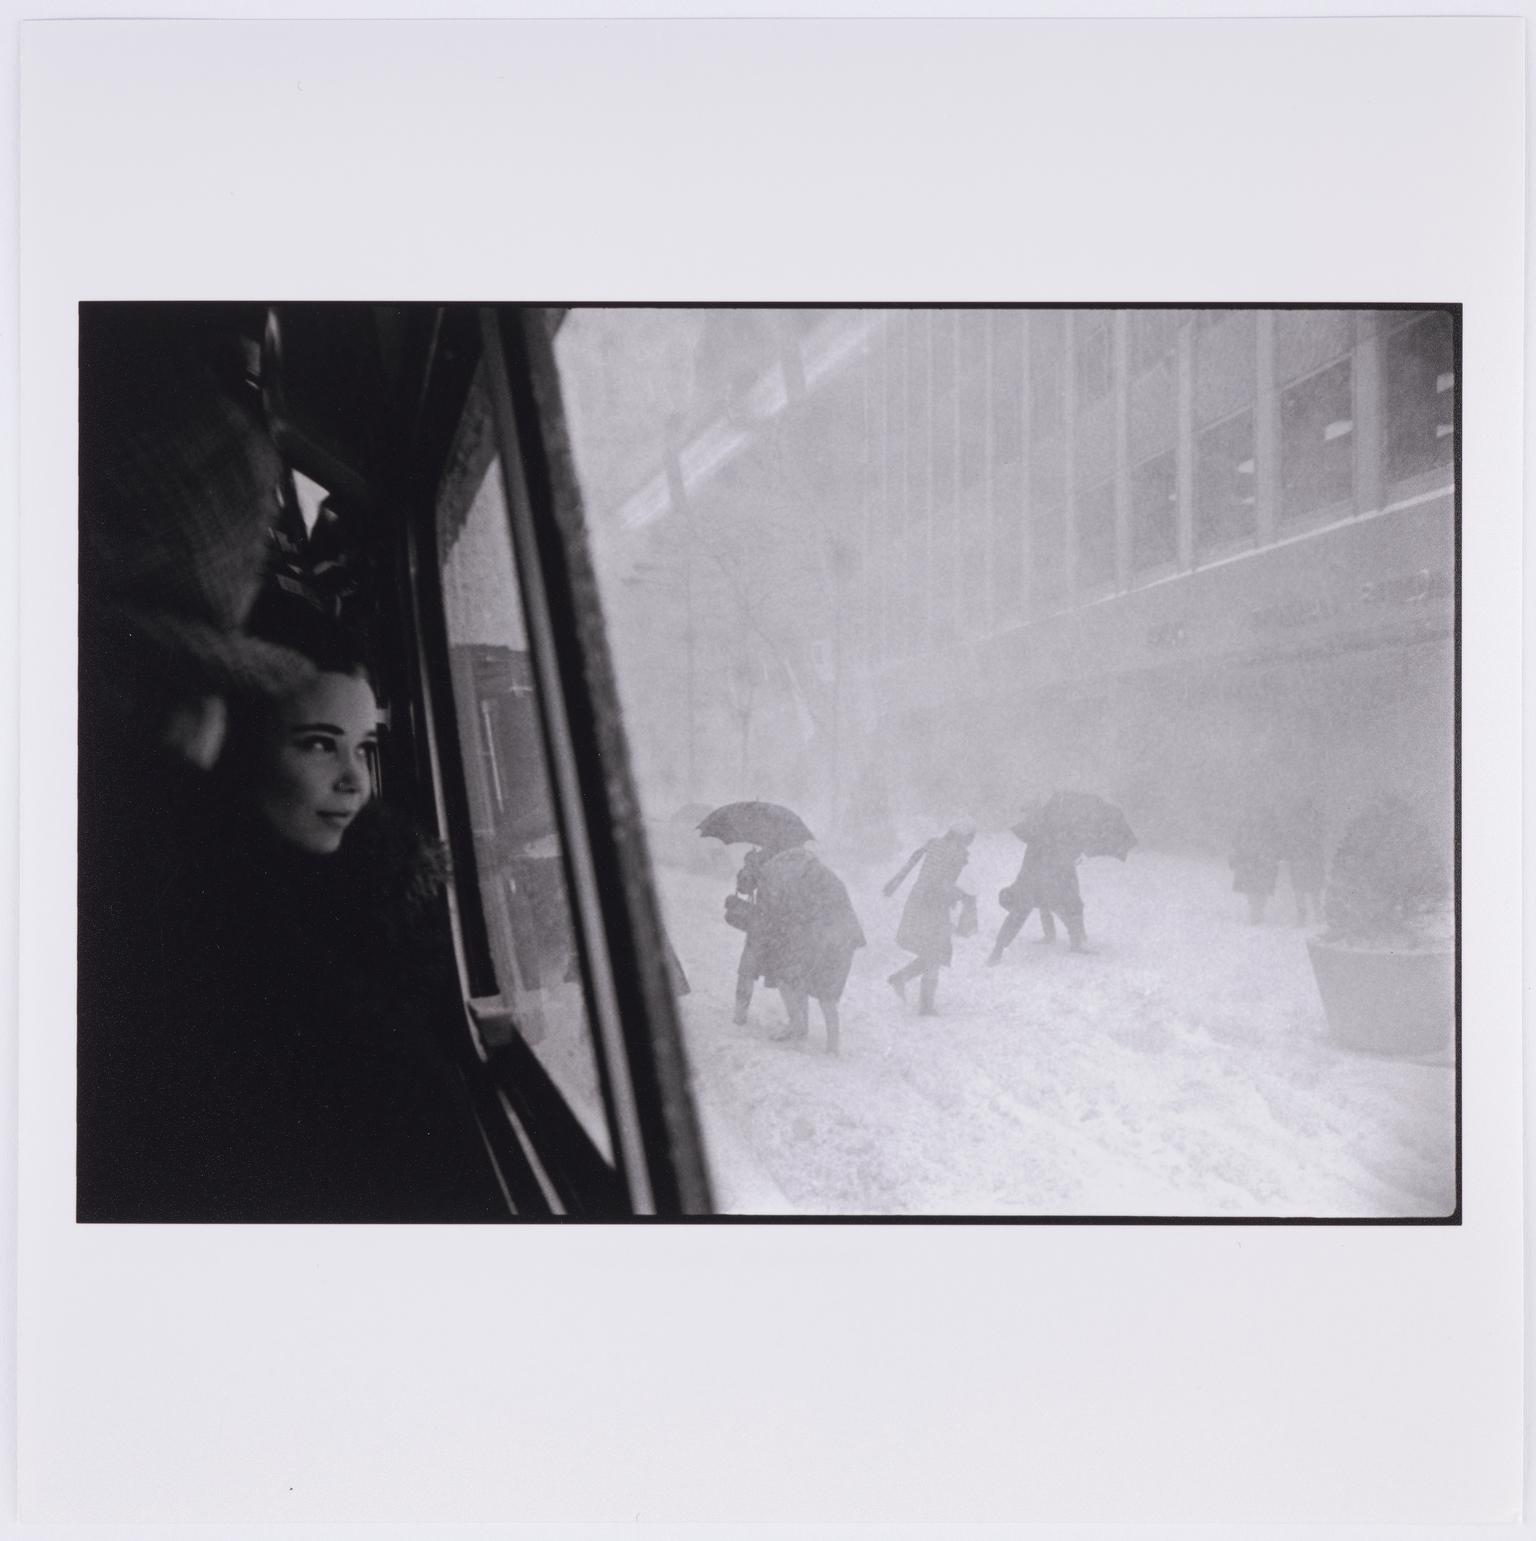 Girl in bus and figures in street during snowstorm, New York City